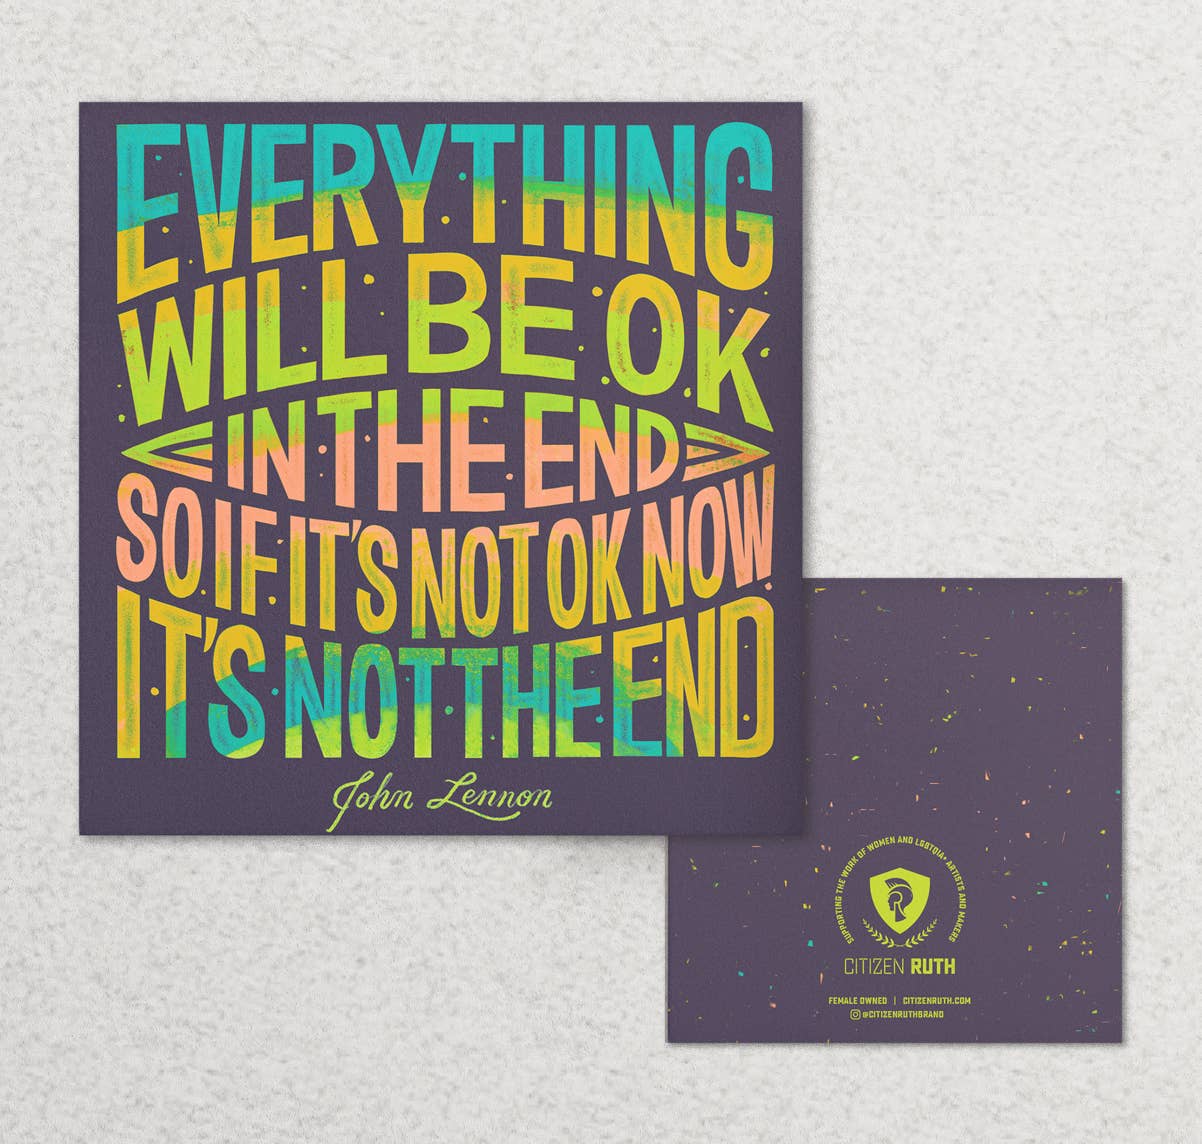 Card that reads: "Everything will be ok in the end so if it's not ok now it's not the end" - John Lennon by Citizen Ruth